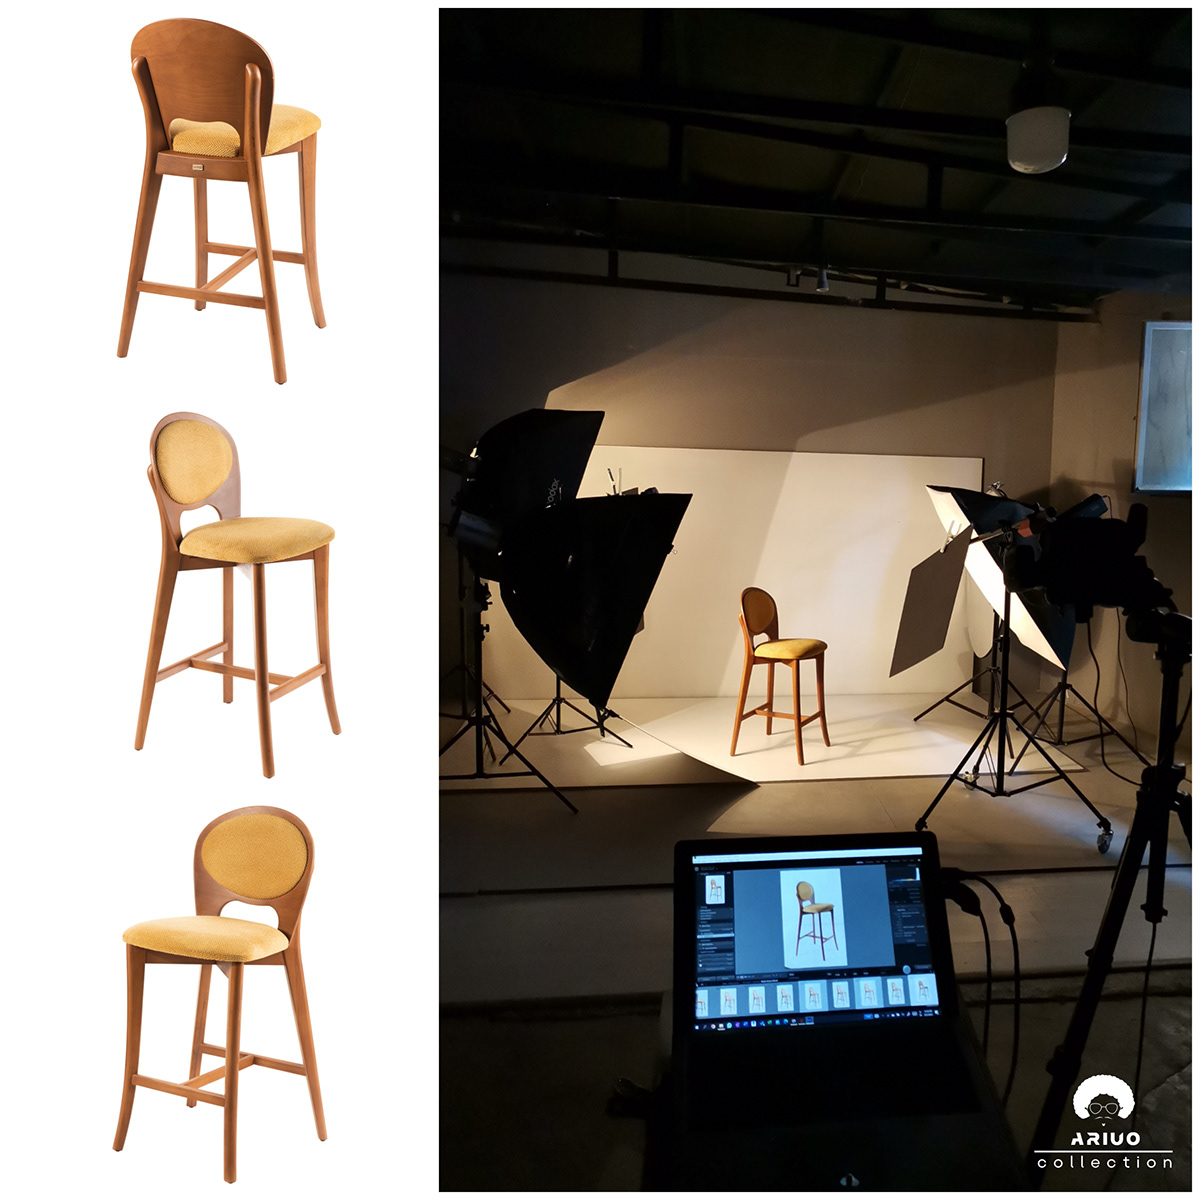 back stage of photography project from chair  with professional lighting in Studio  